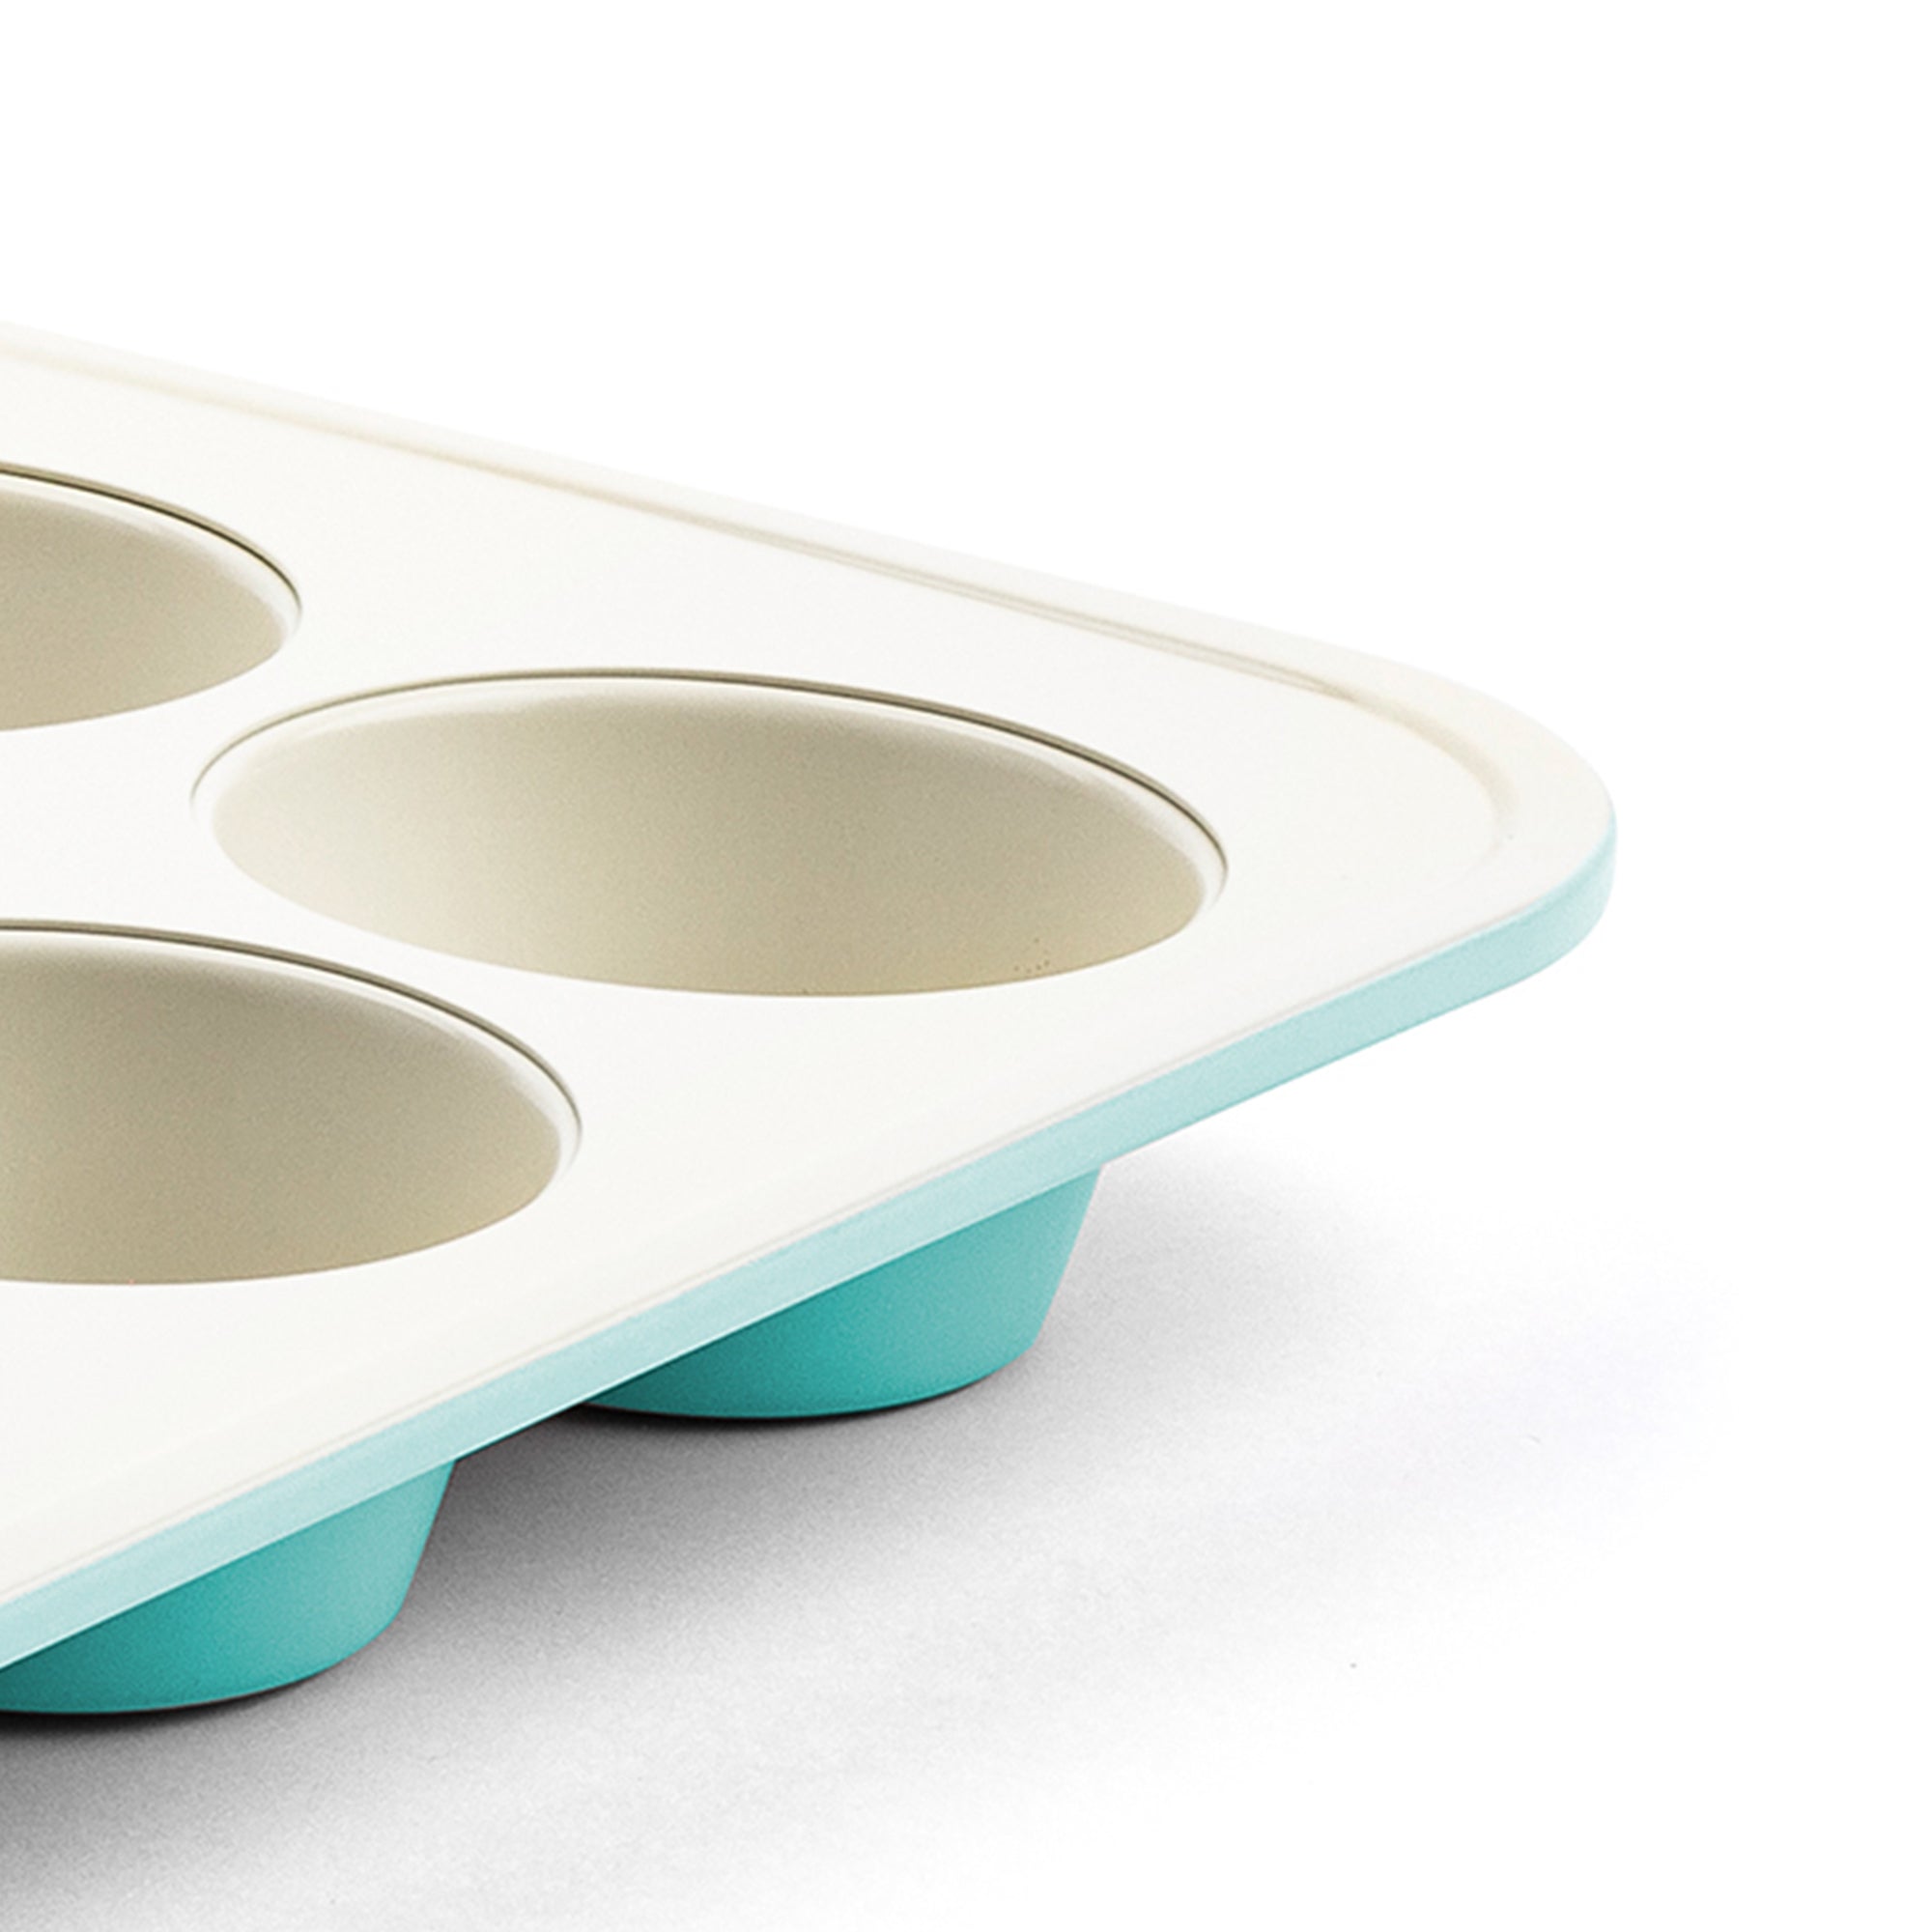 GreenLife 12 Cup Healthy Ceramic Nonstick Muffin Pan, Turquoise